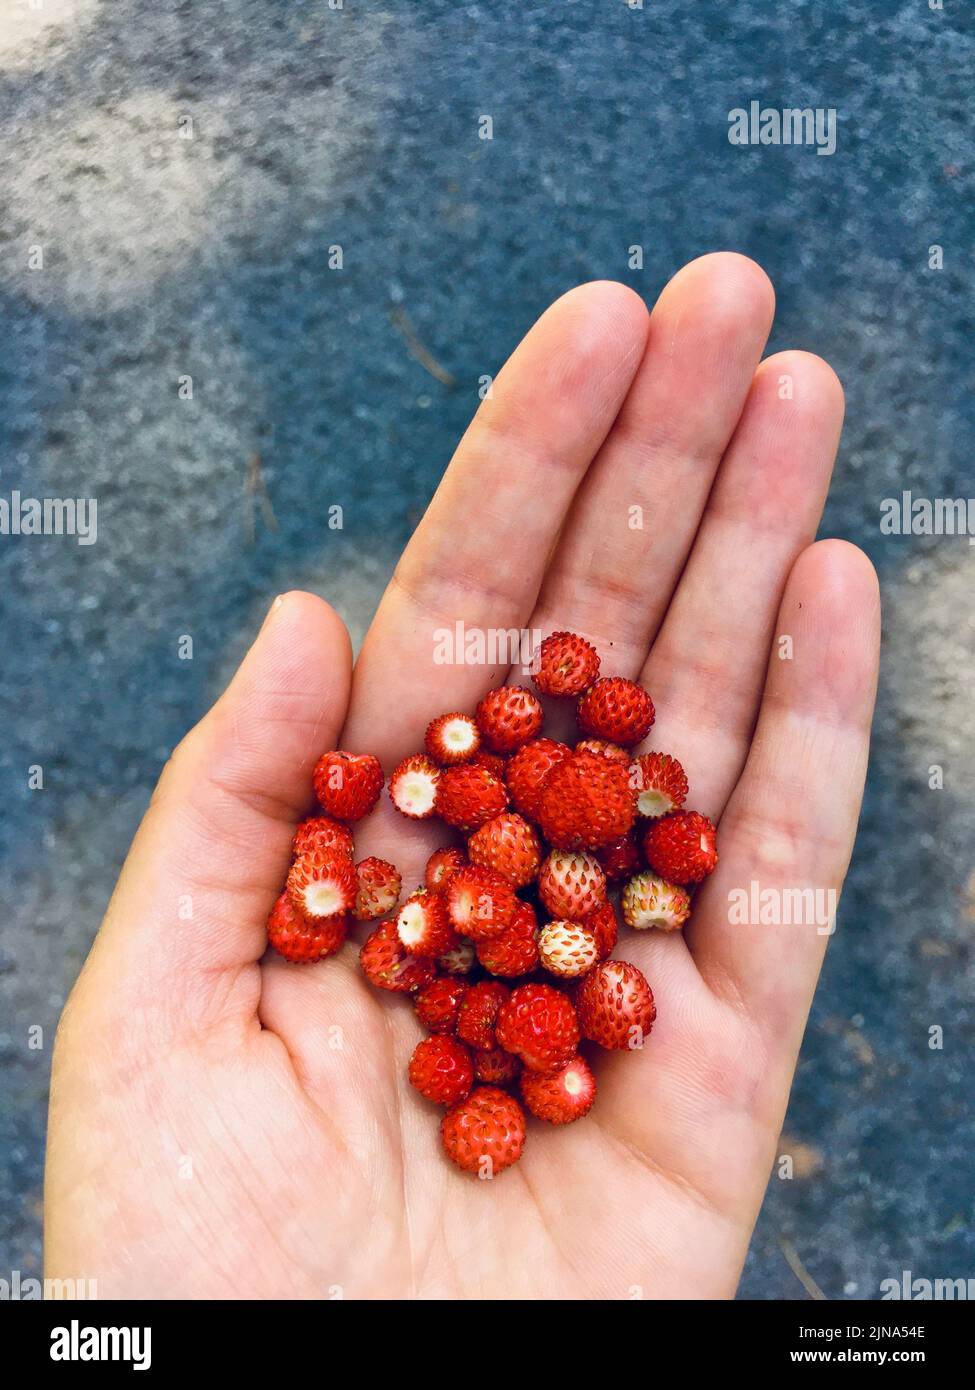 Close-up of a person holding a handful of fresh wild strawberries, Bosnia and Herzegovina Stock Photo